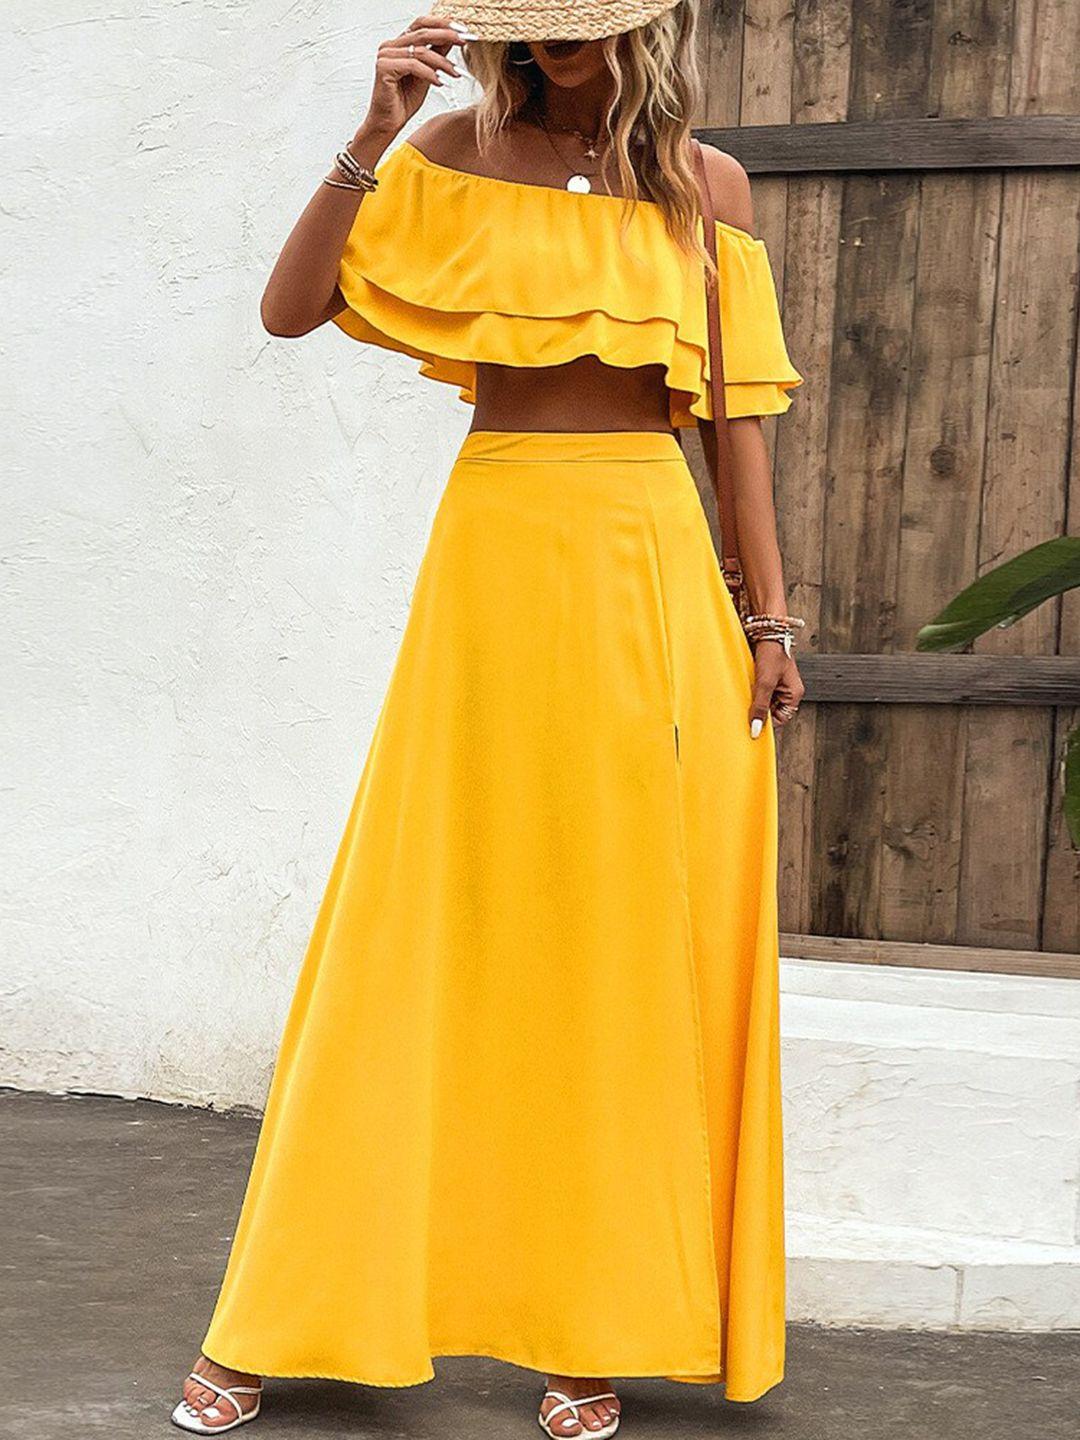 bostreet yellow off shoulder top with skirt